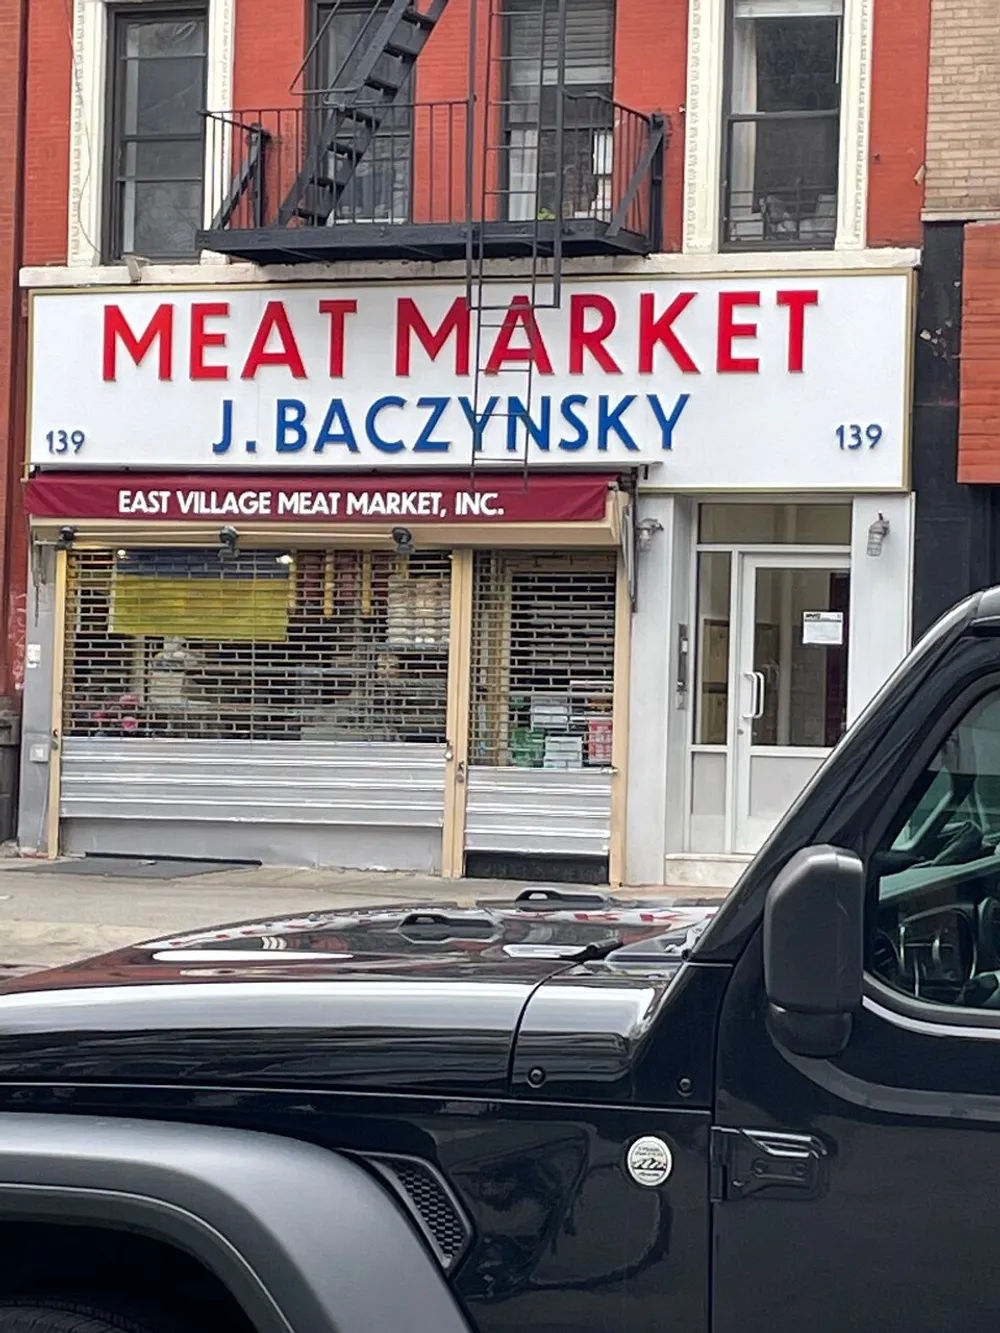 The image shows a storefront with a sign that reads MEAT MARKET J BACZYNSKY above a closed security gate indicating it may be a specialty butchery named after someone with Eastern European heritage located at building number 139